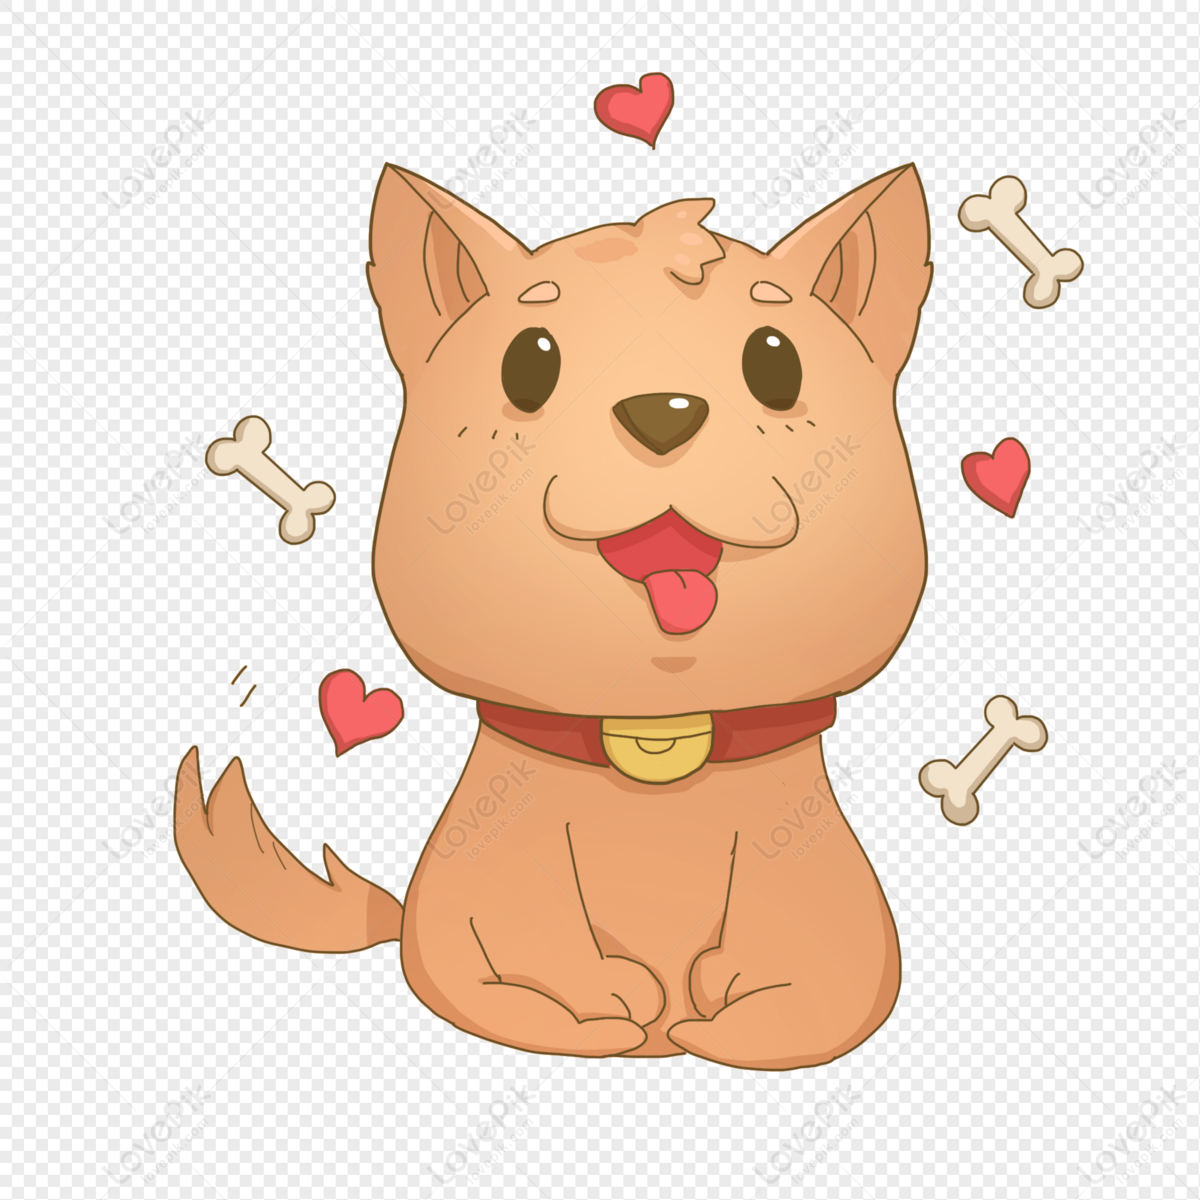 Cute Cartoon Dog PNG Free Download And Clipart Image For Free Download -  Lovepik | 401406163